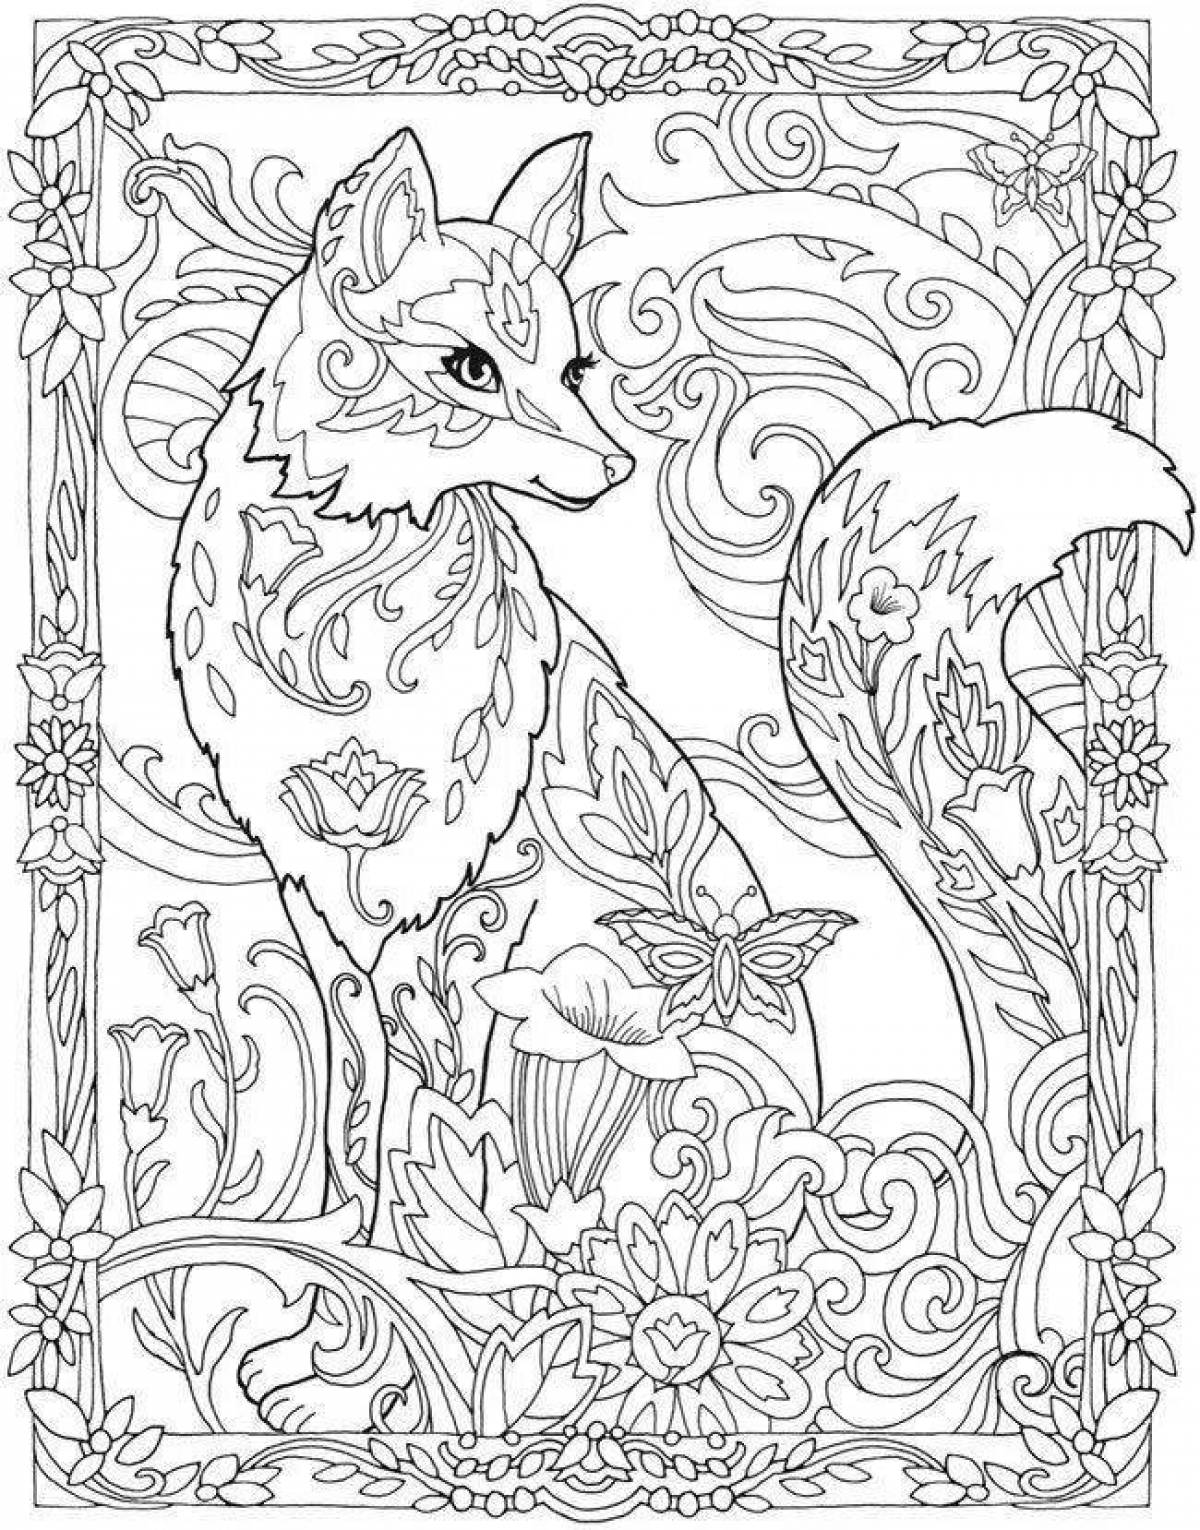 Coloring fox with imagination by numbers